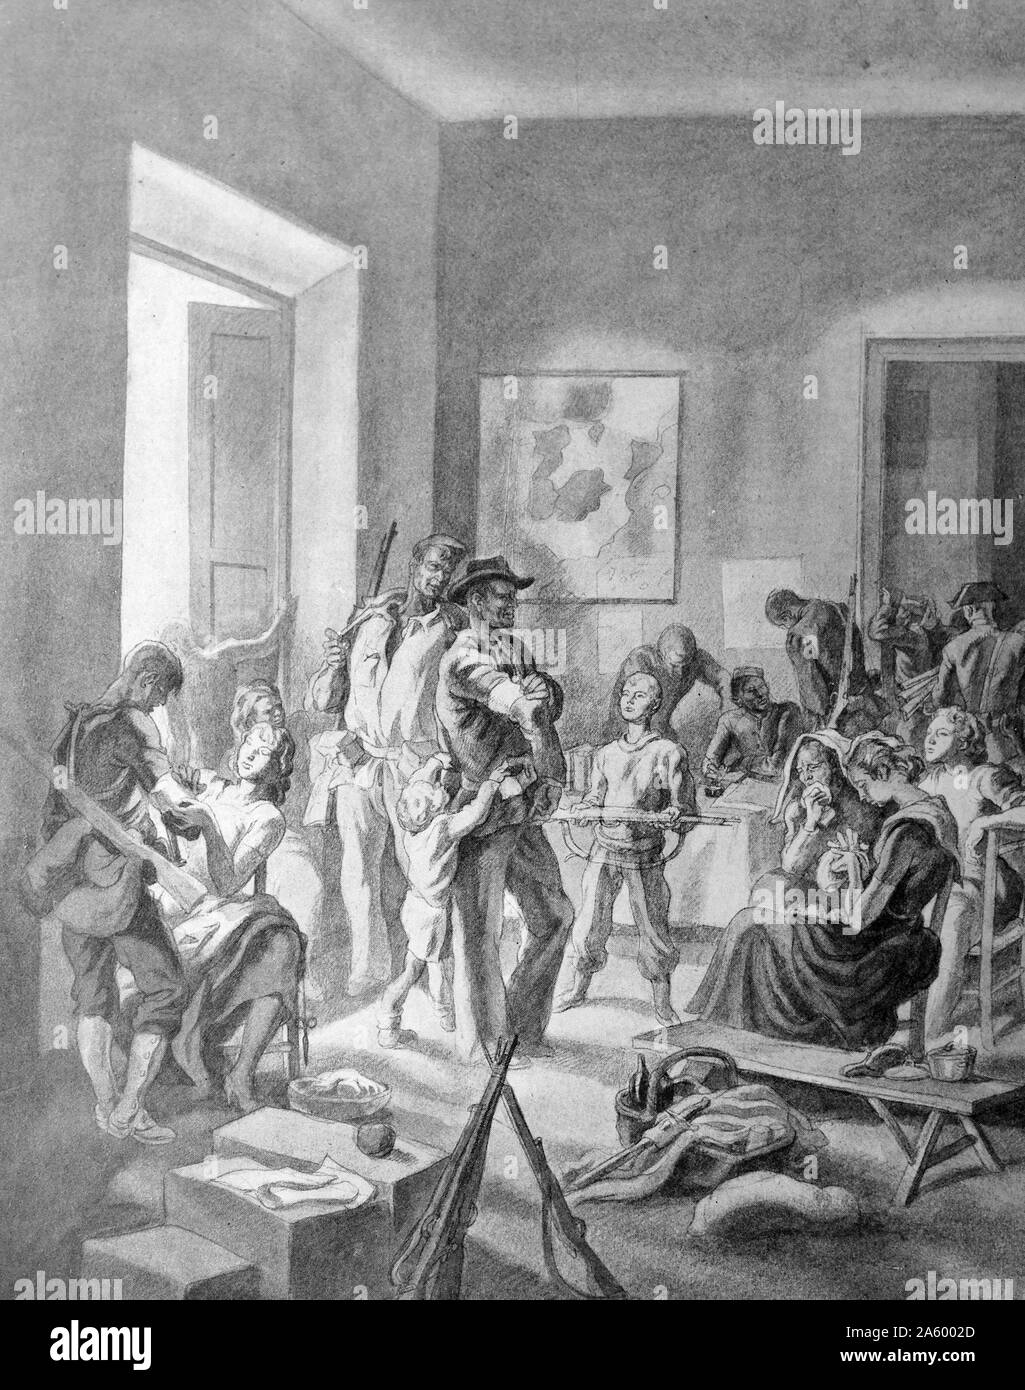 Propaganda illustration by Carlos Saenz De Tejada depicting Nationalist families under siege in a school building during the Spanish Civil War. Dated 1937 Stock Photo